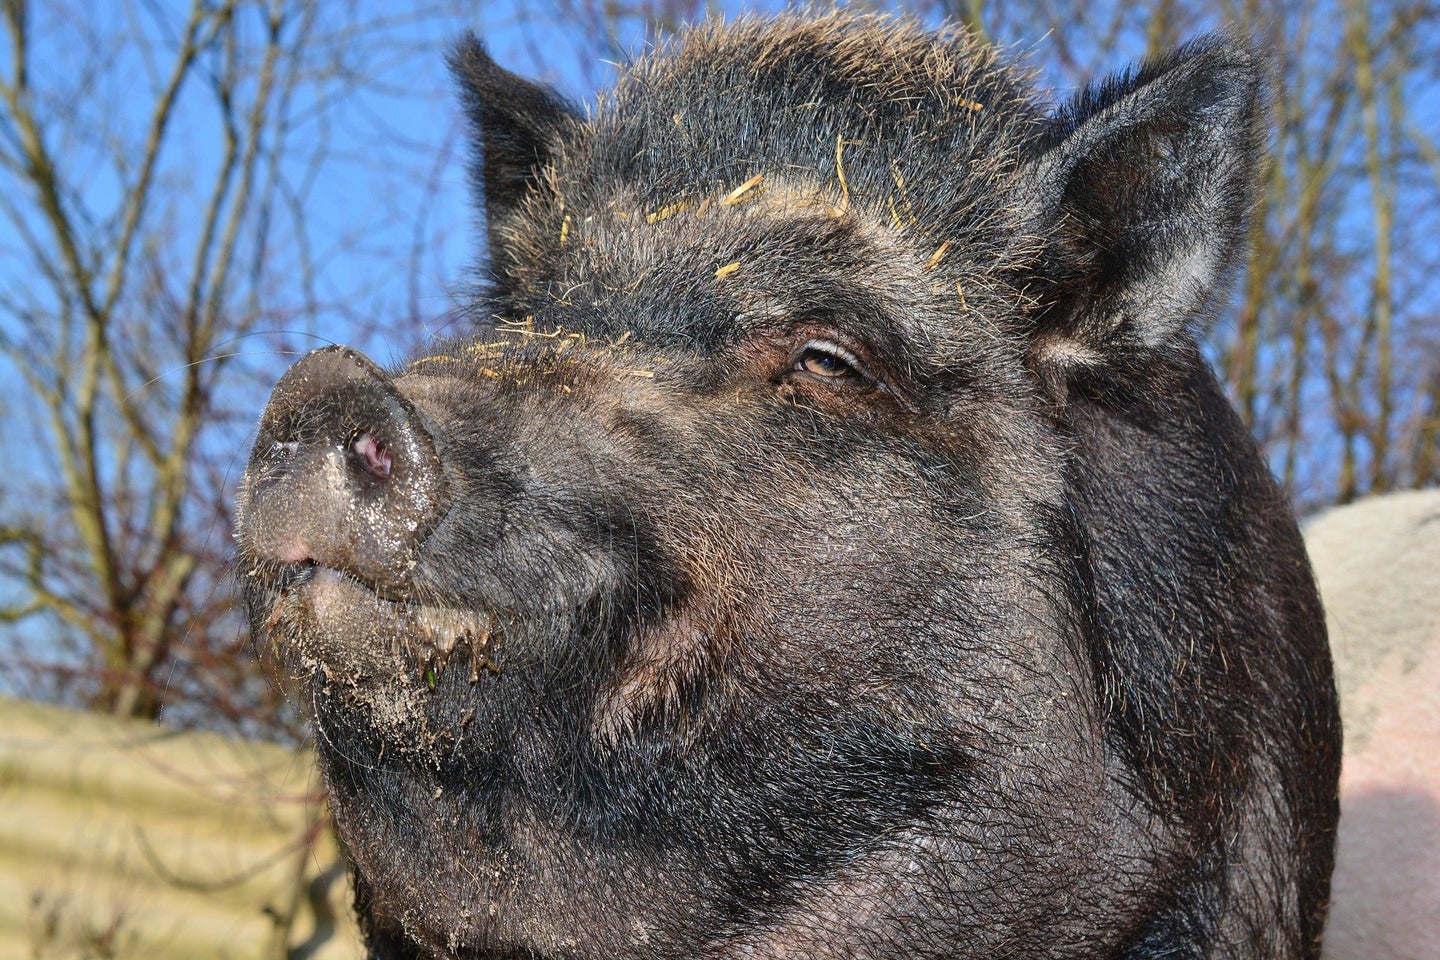 Wild pig hunting at night could become a reality in Alabama.